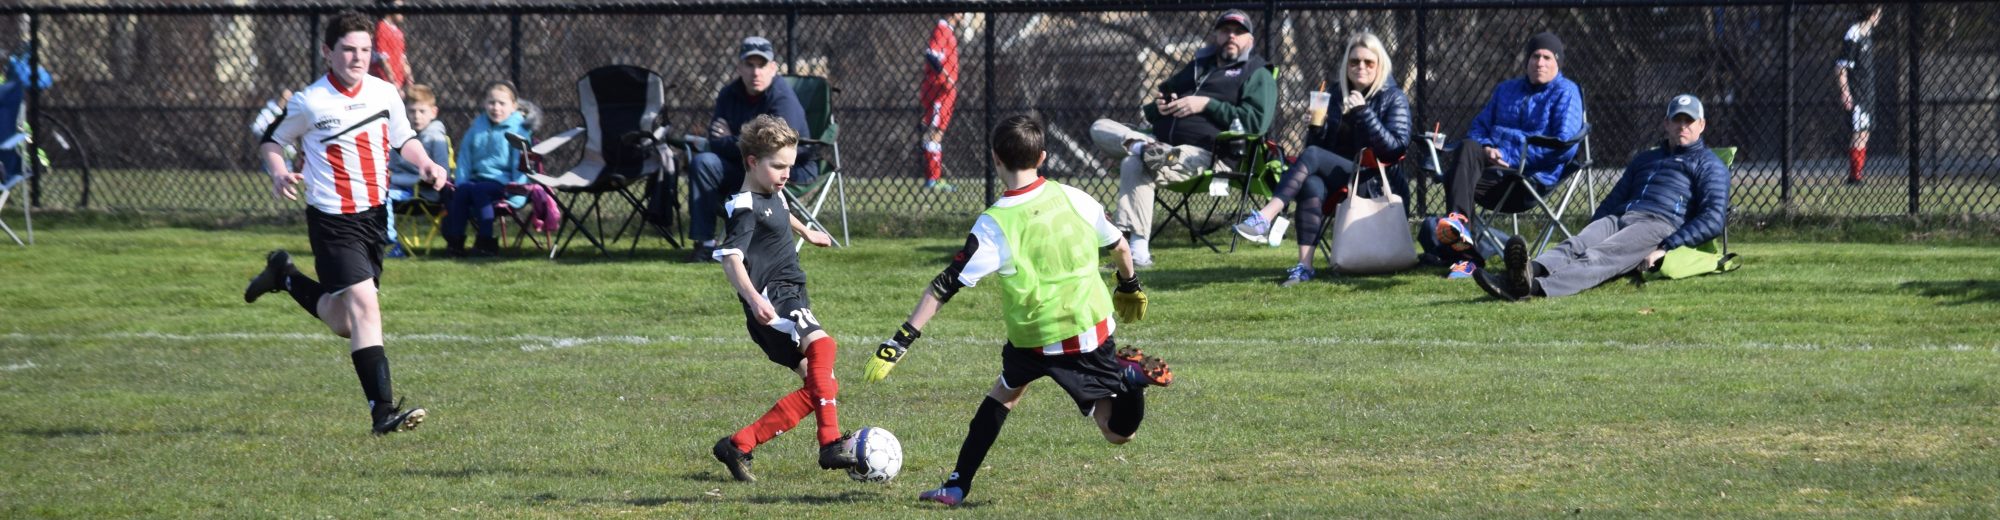 Marblehead Youth Soccer Association